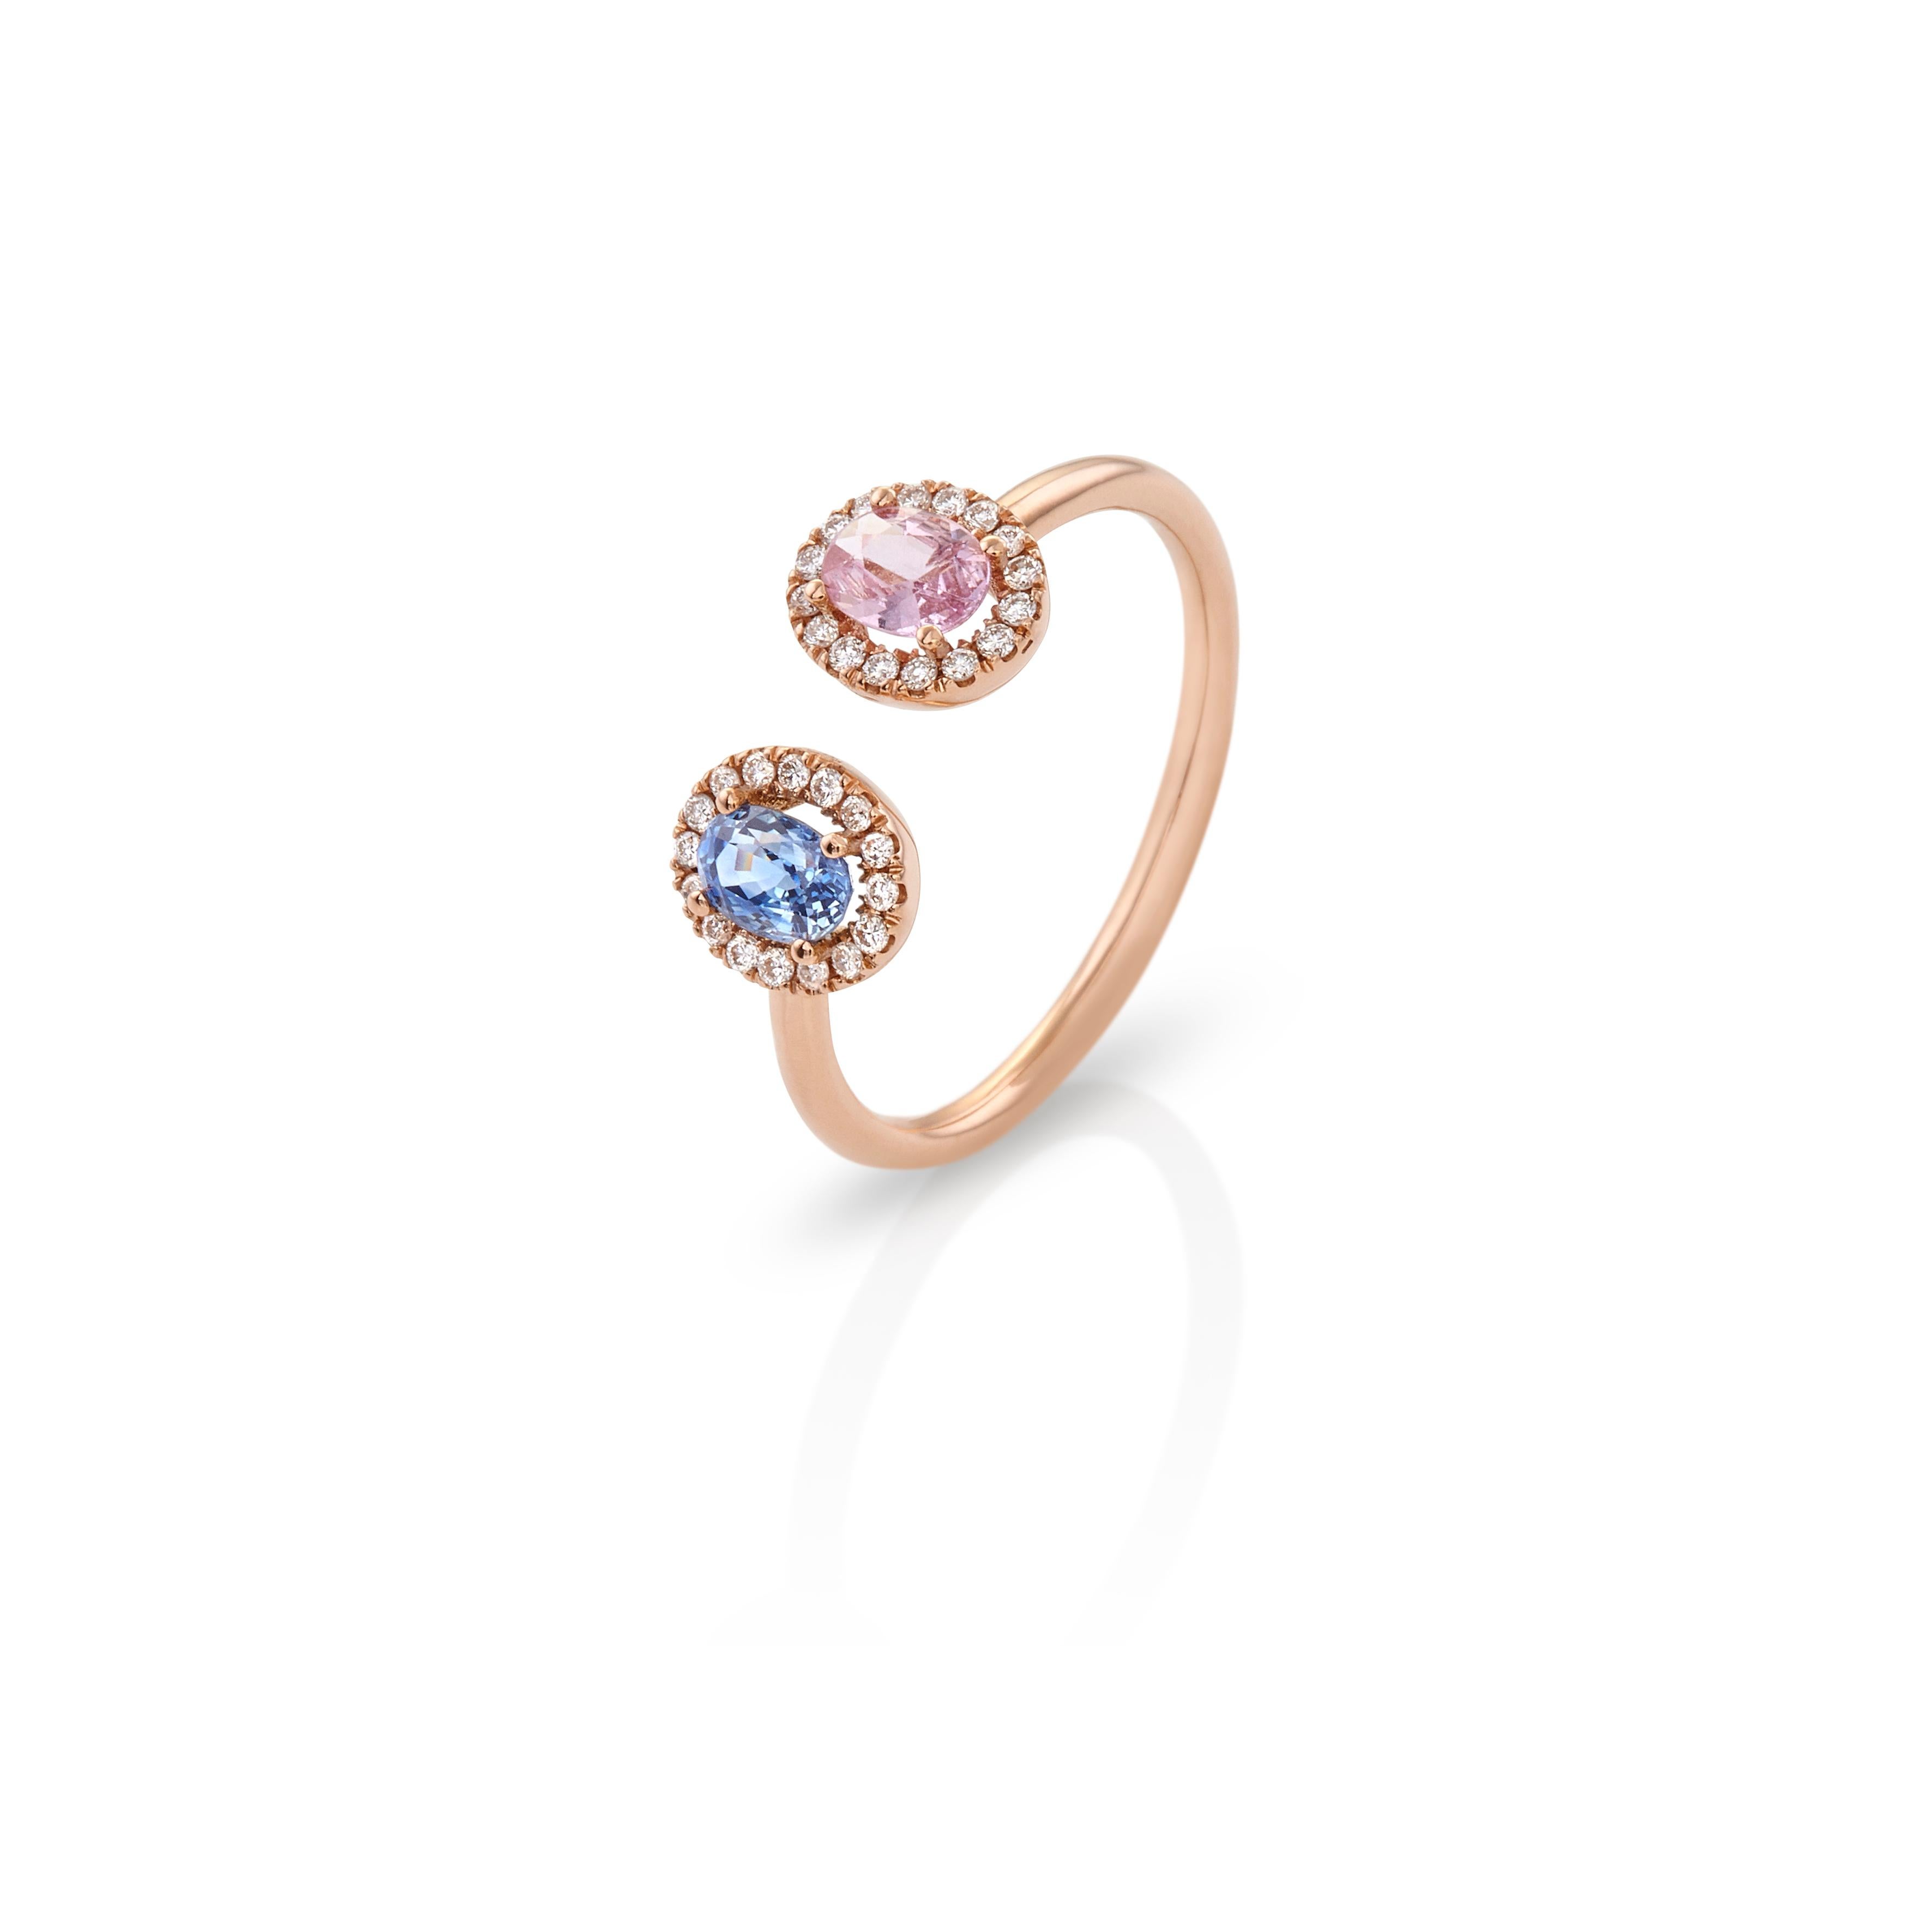 For Sale:  Disconnected Two Sapphires Ring Pink and Blue 18kt Rose Gold with Diamonds Halo 3